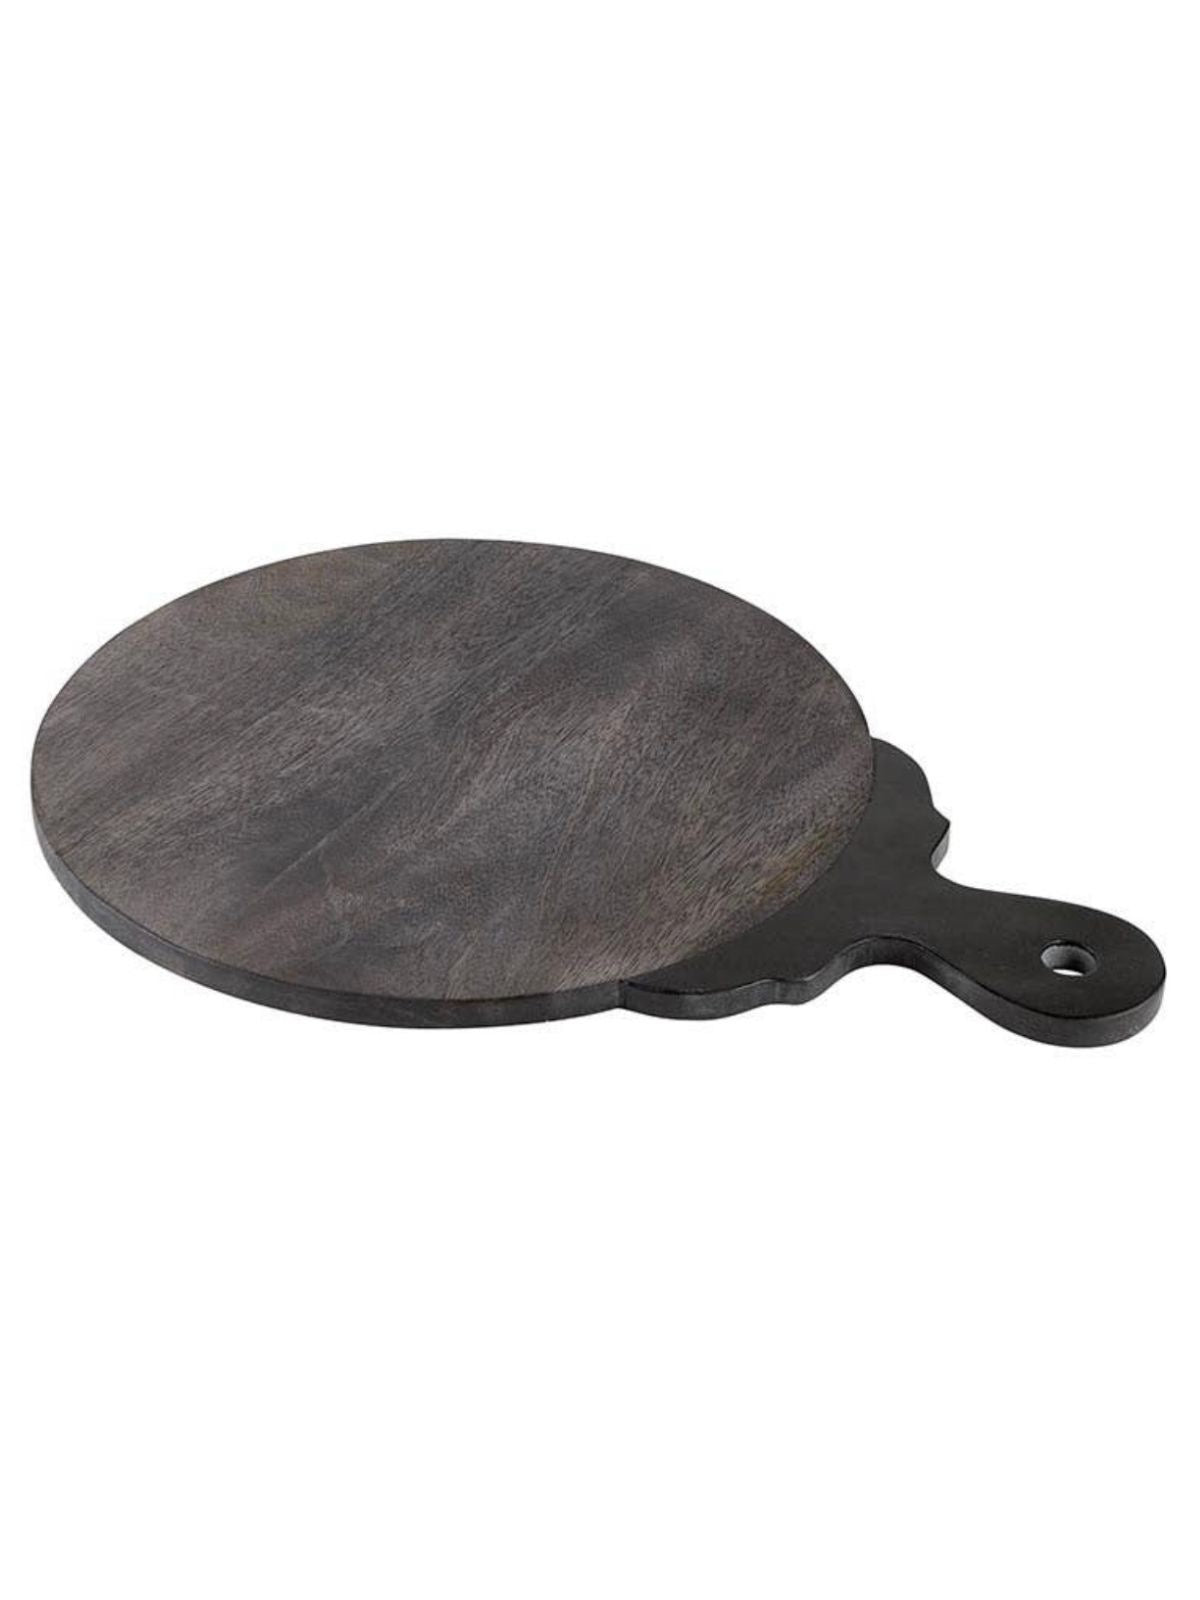 Round Dark Wash Natural Wood Charcuterie Cheese Board with Black Carved Marble Handle.